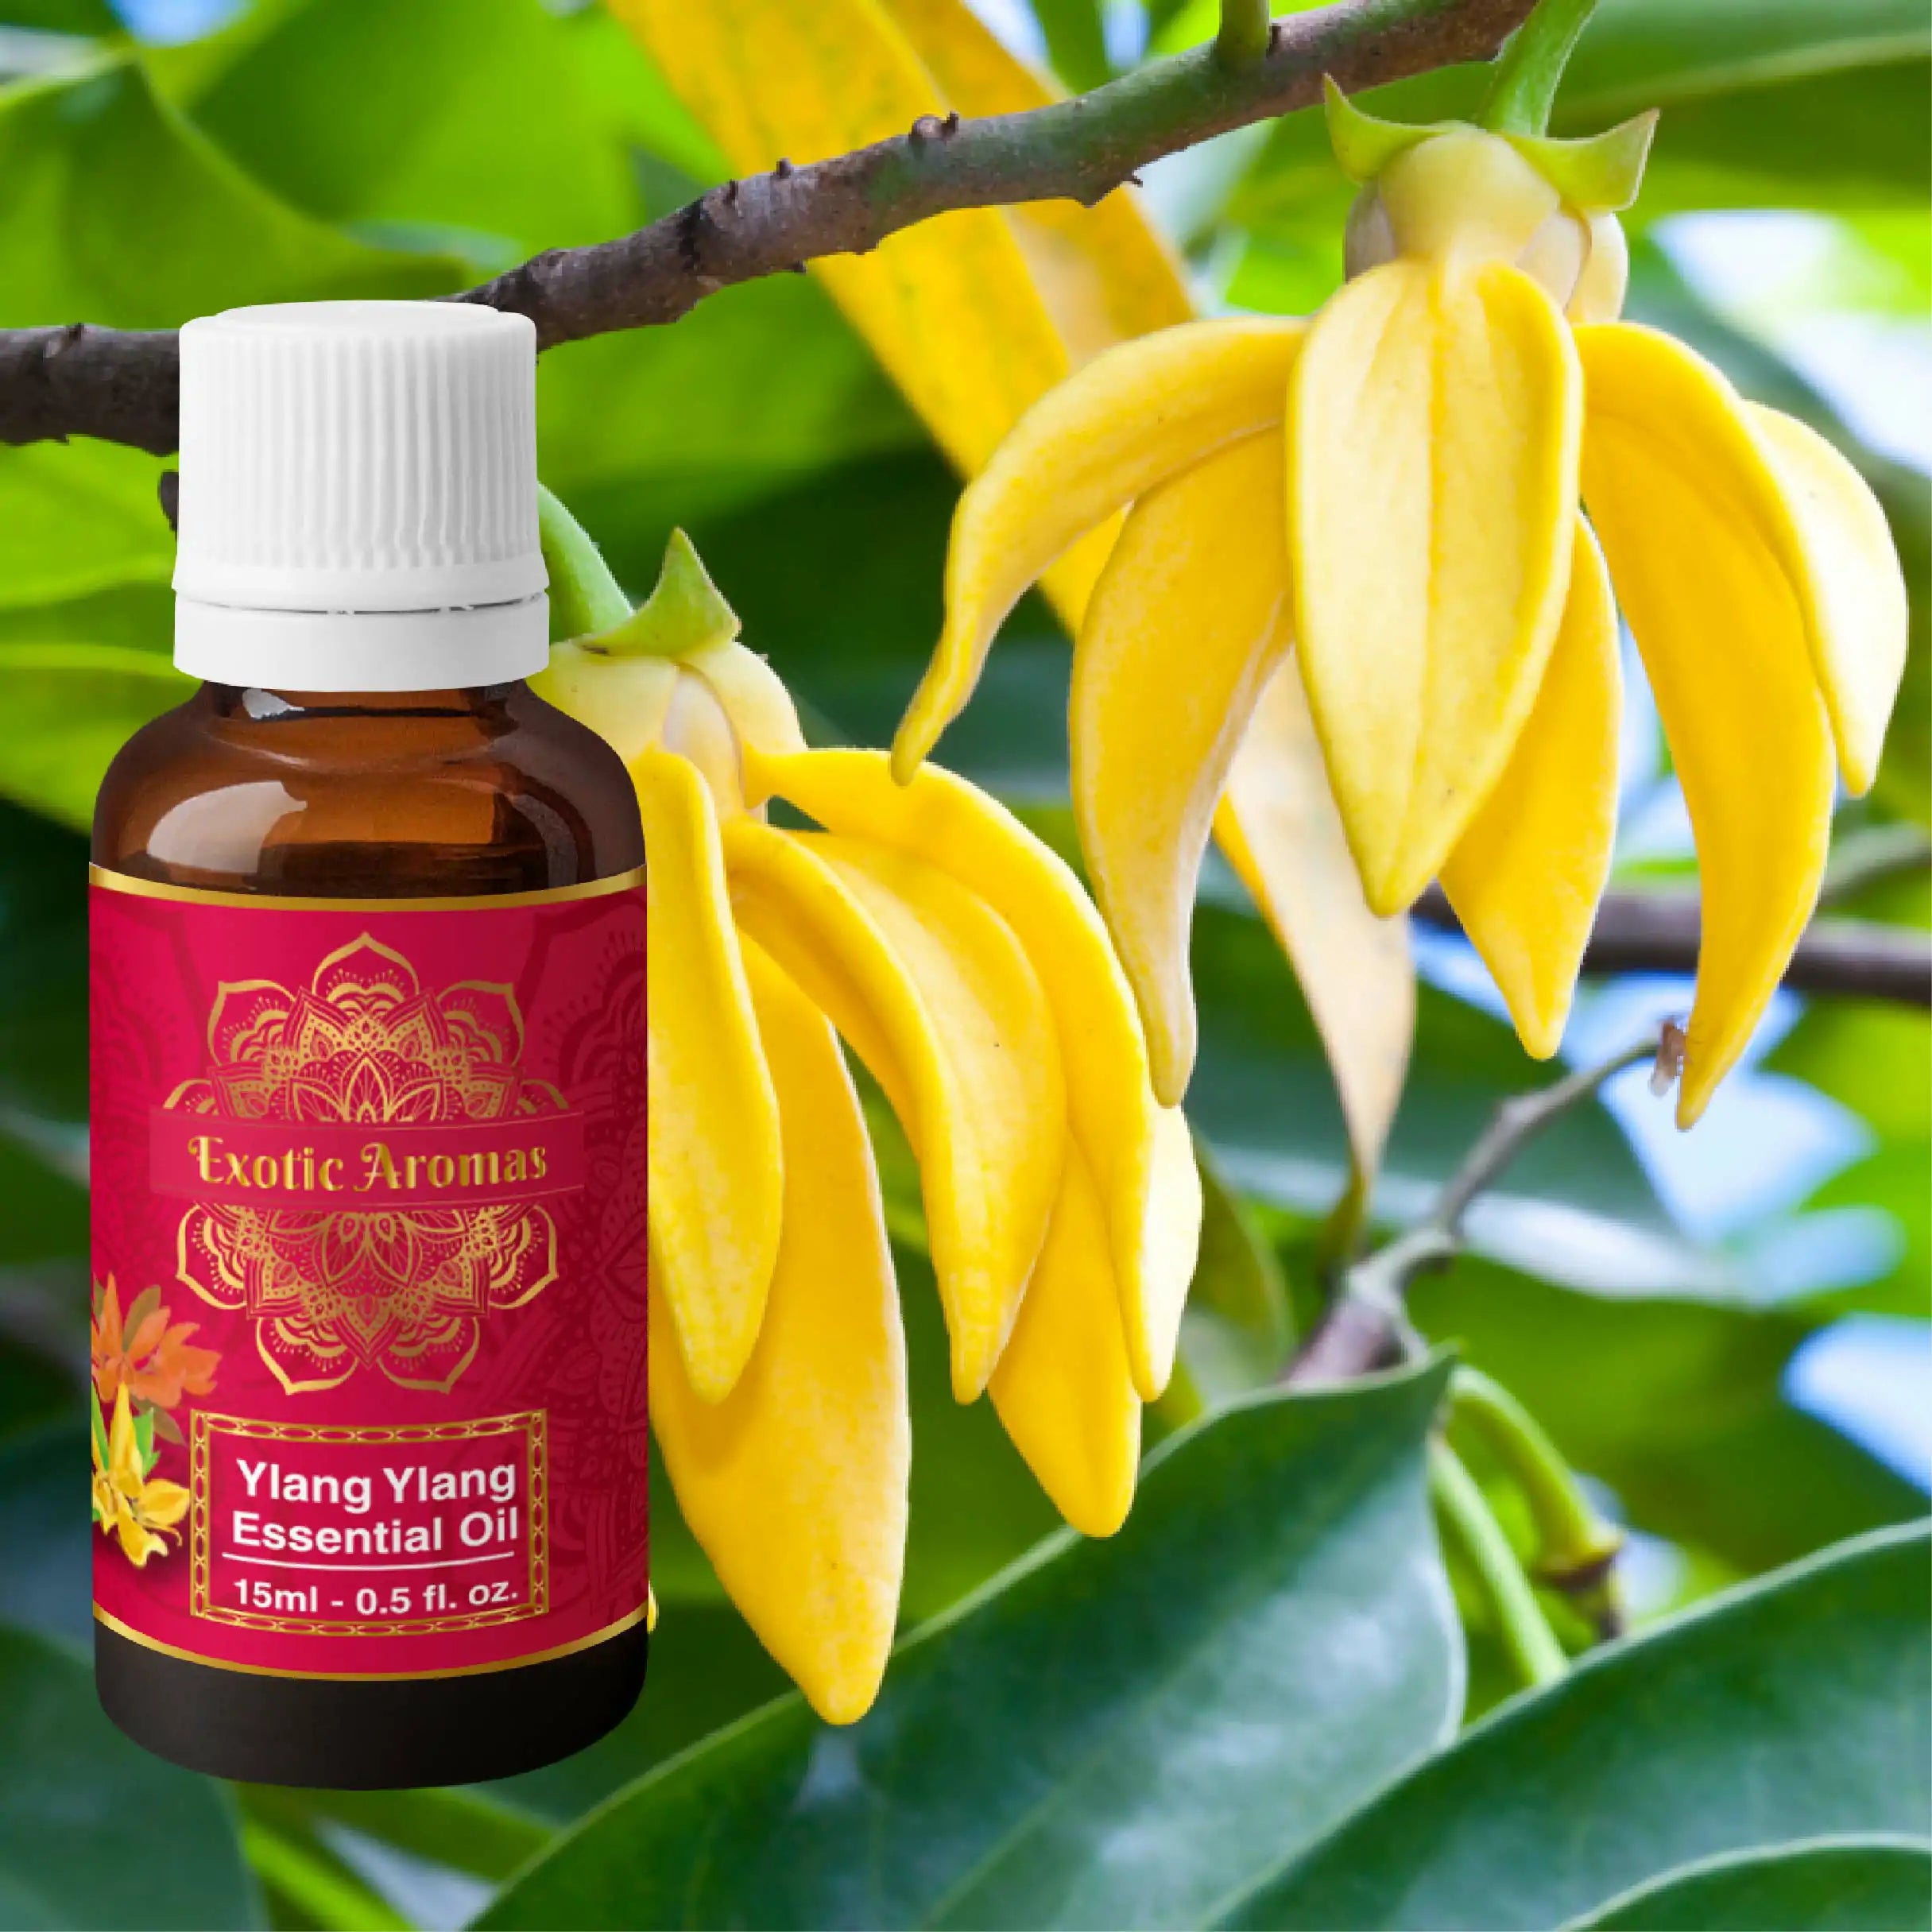 Ylang Ylang Essential Oil for Hair Strengthening, Acne Control & Aromatherapy (15Ml + 15Ml) Pack of 2